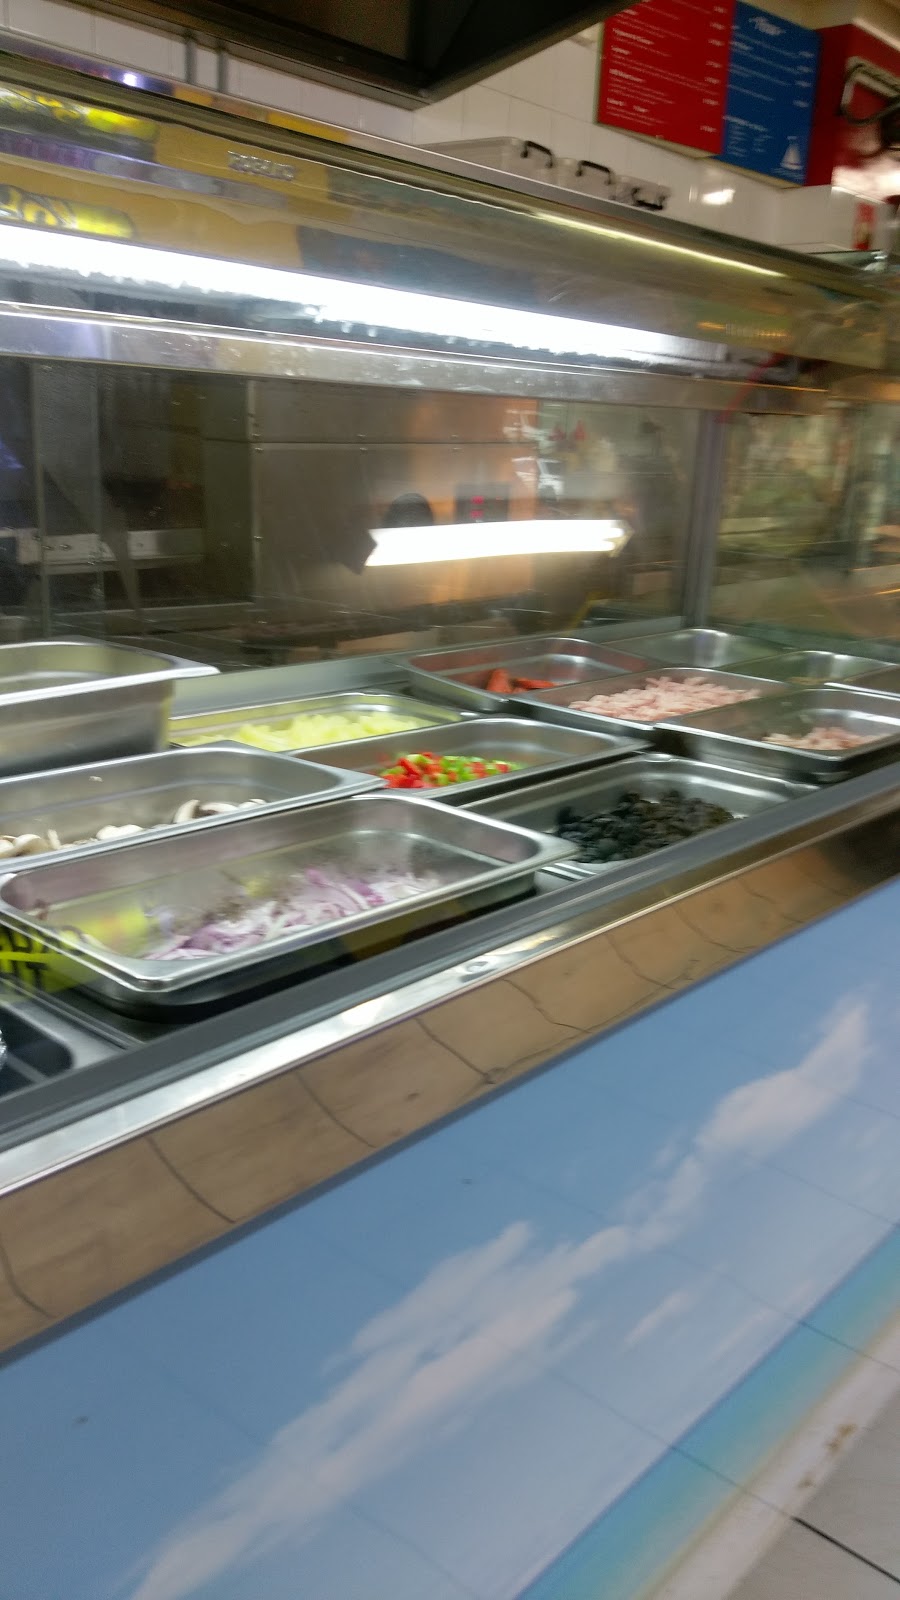 Summerland Takeaway | meal takeaway | 4/62 Cams Blvd, Summerland Point NSW 2259, Australia | 0249762029 OR +61 2 4976 2029